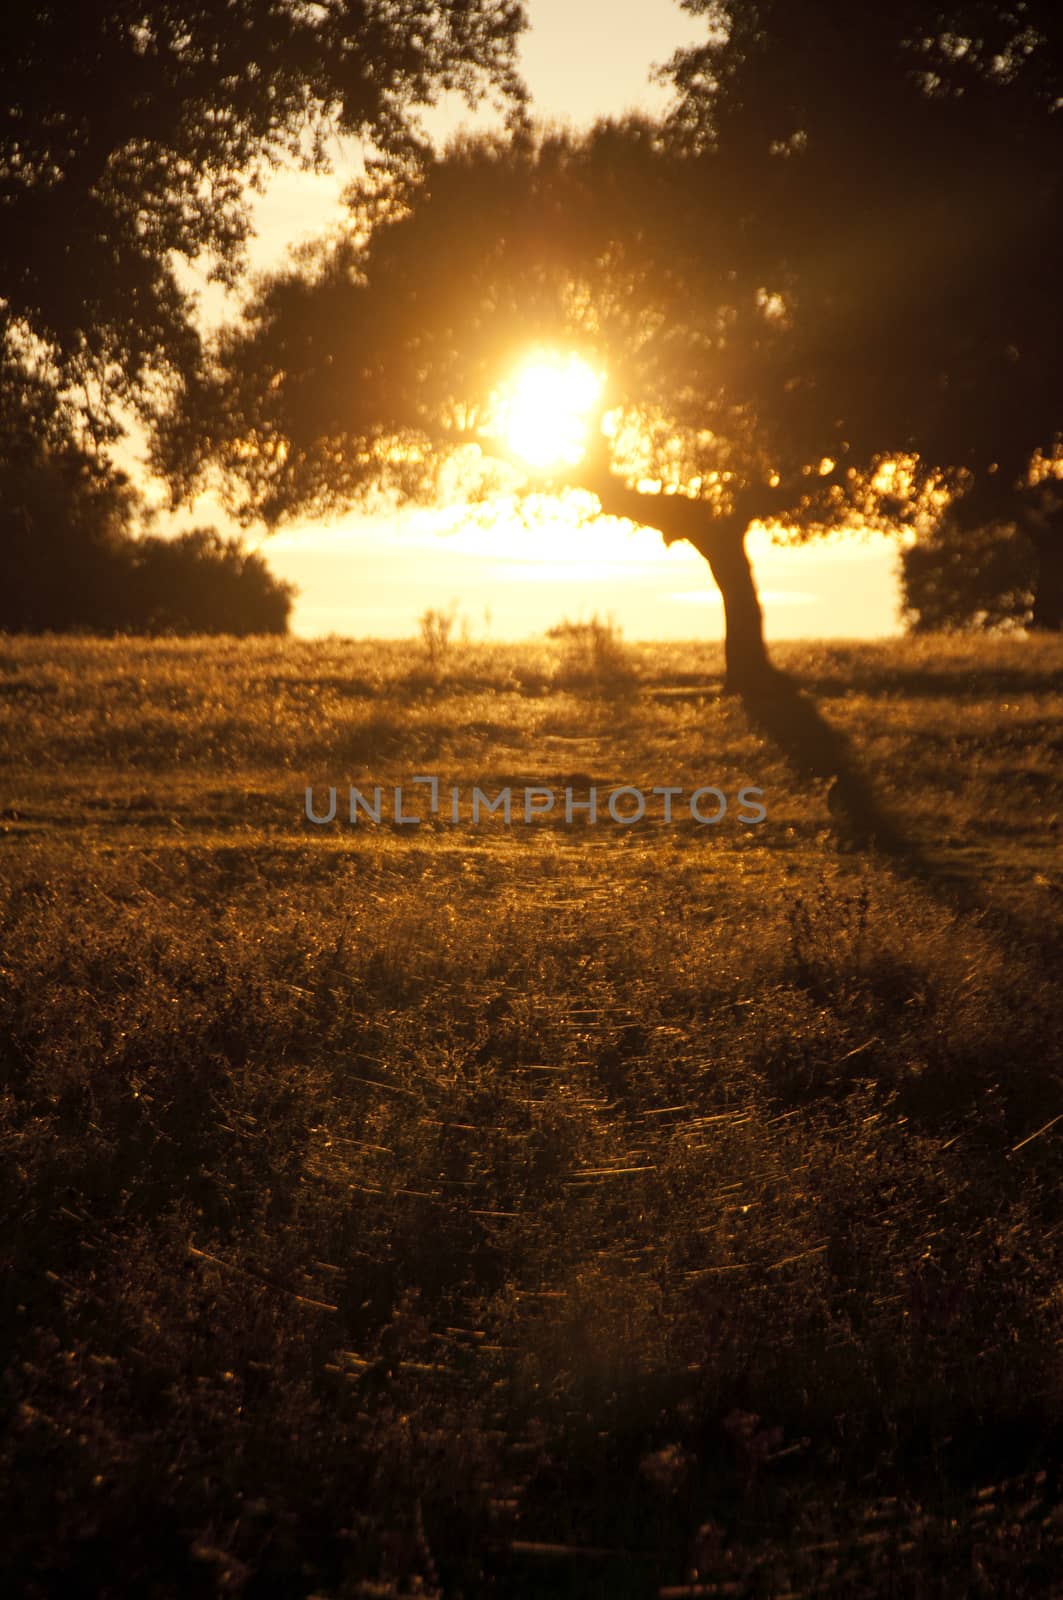 Landscape of the meadow, sunset between oaks by jalonsohu@gmail.com